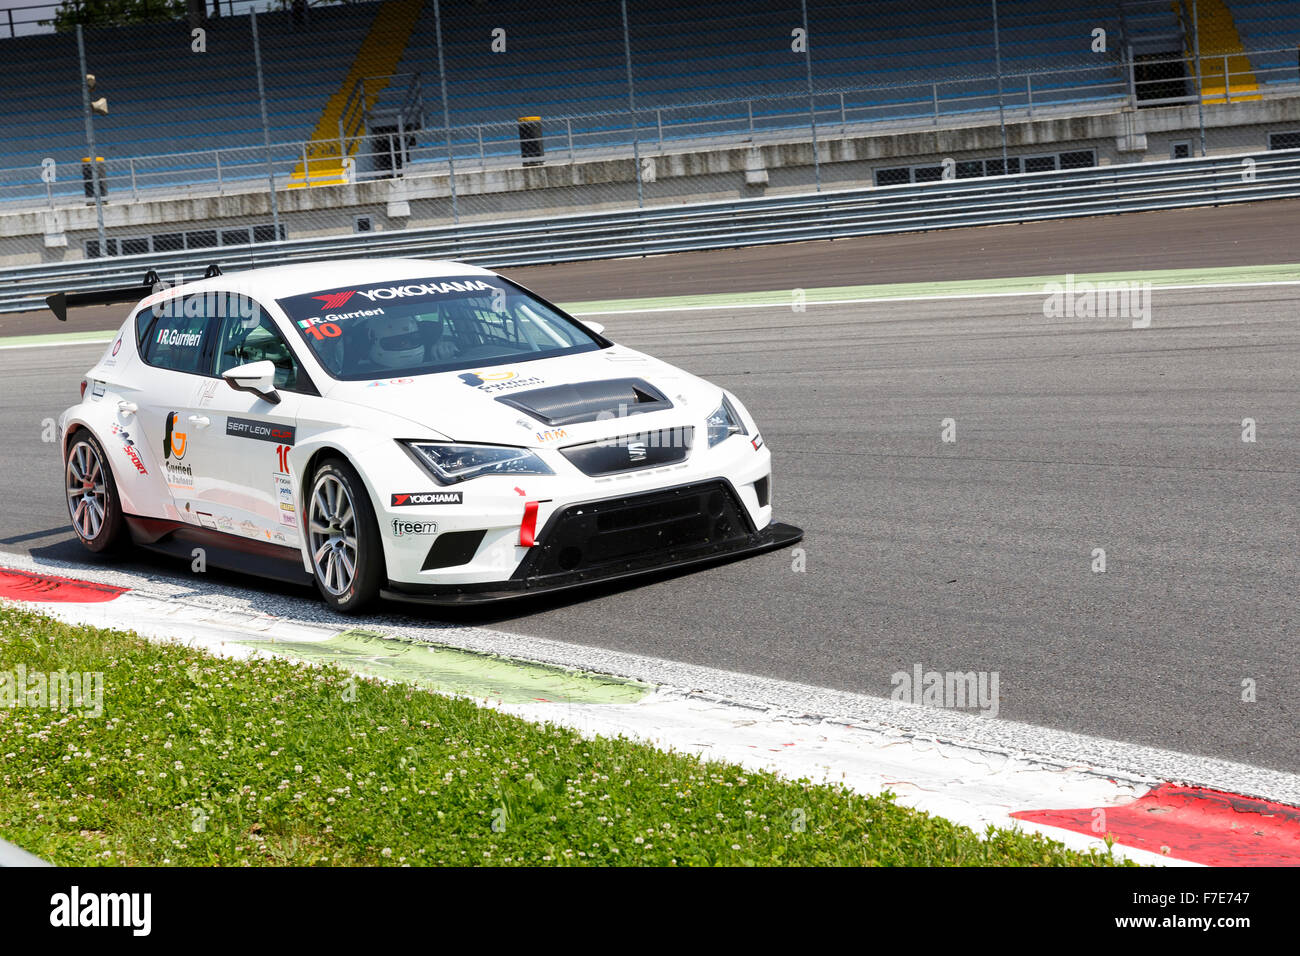 Monza, Italy - May 30, 2015: SEAT Leon Cup Racing of LRM team driven  by GURRIERI Raffaele during the Seat Leon Cup - Race Stock Photo